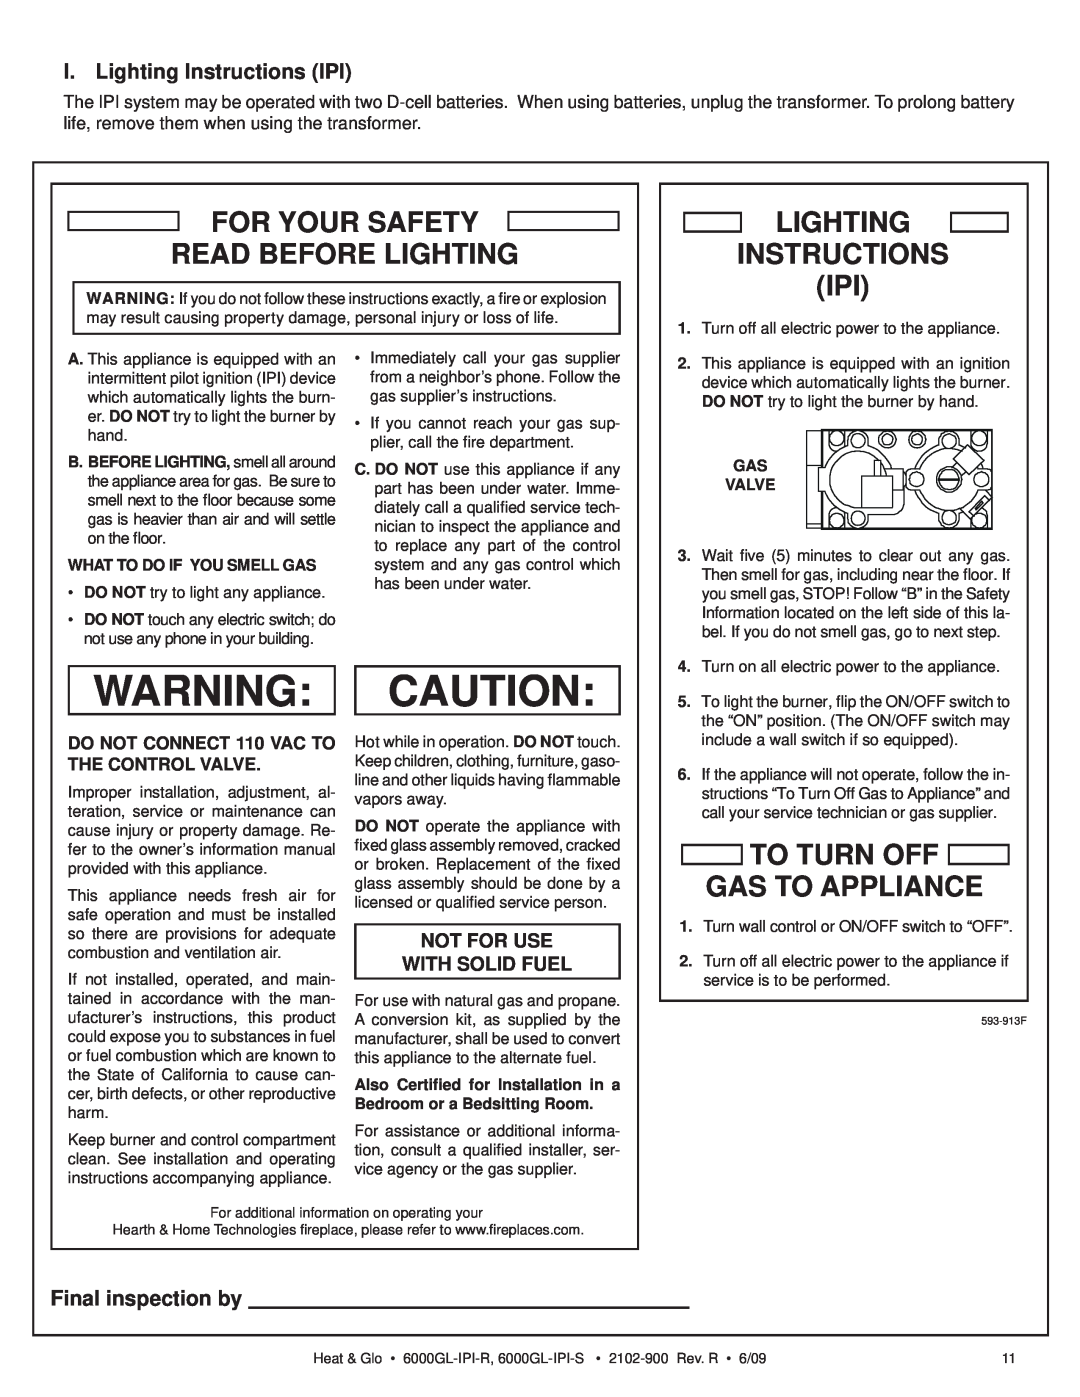 Heat & Glo LifeStyle 6000GL-IPI-R For Your Safety Read Before Lighting, Lighting Instructions Ipi, Final inspection by 